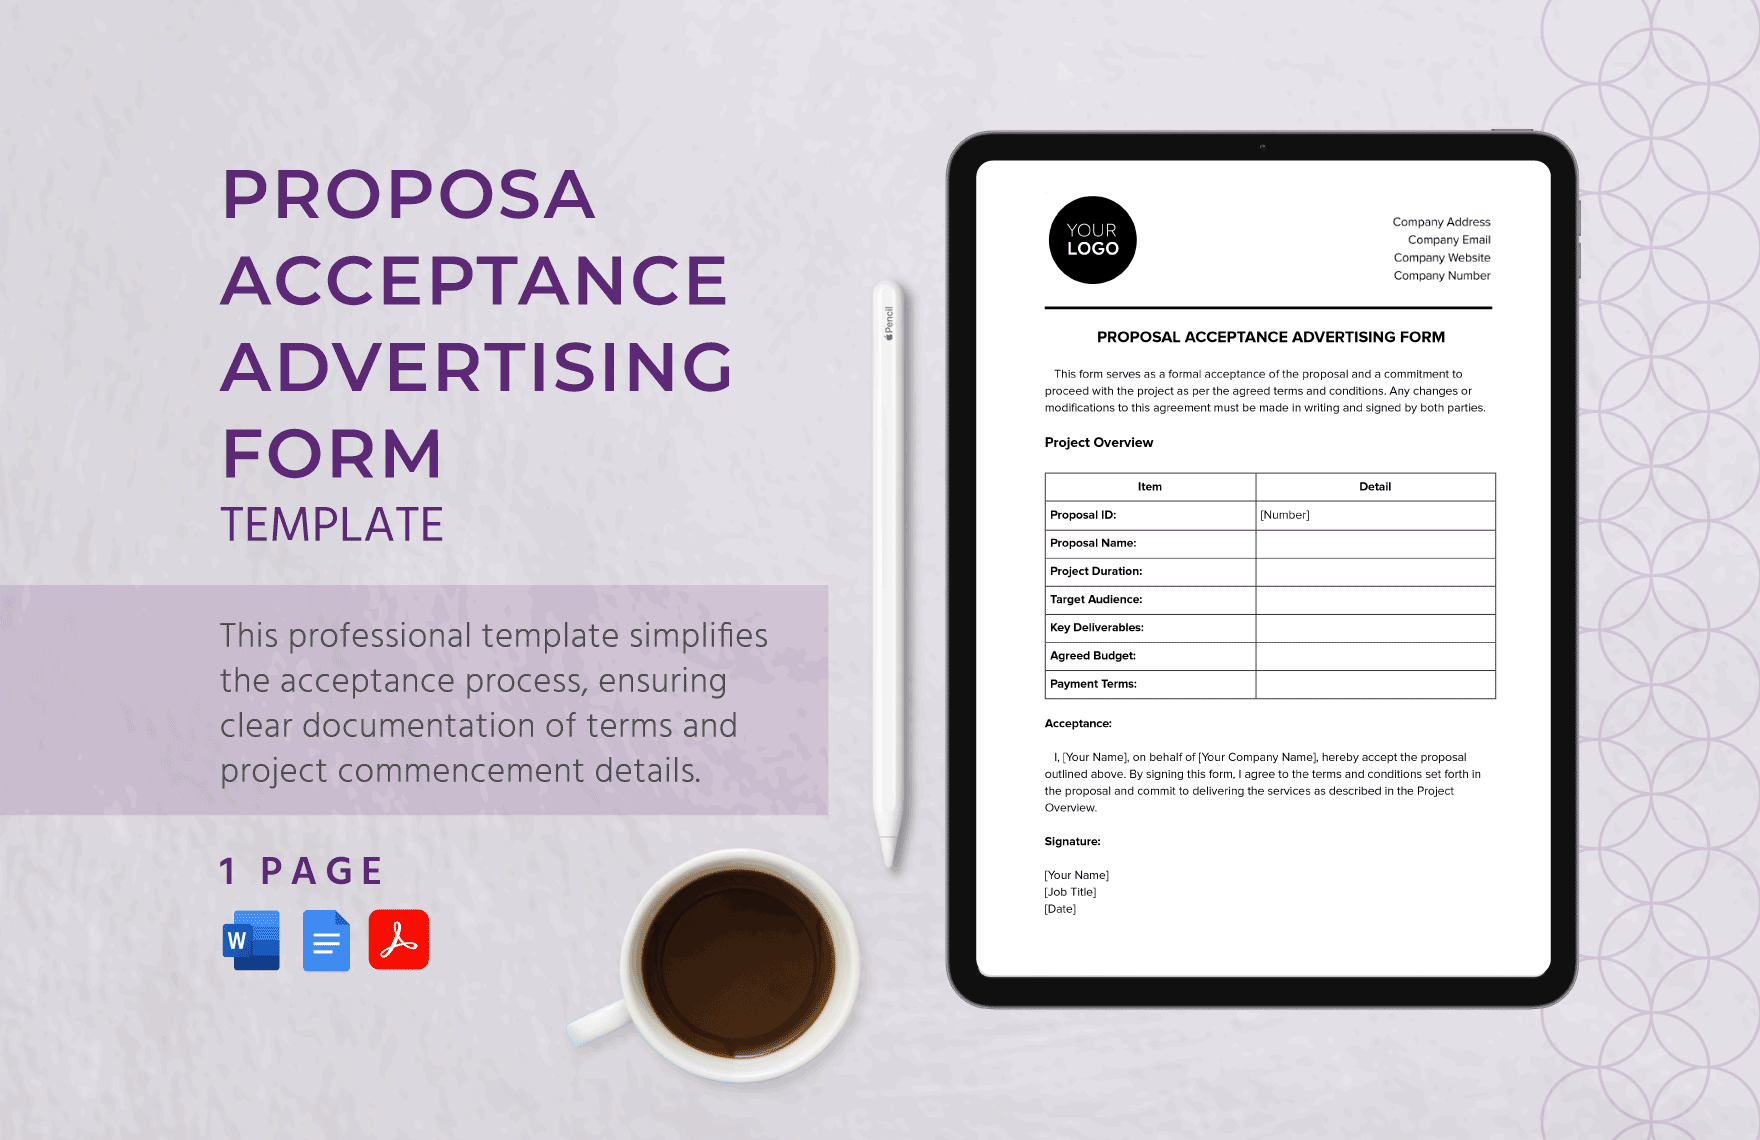 Proposal Acceptance Advertising Form Template in Word, Google Docs, PDF